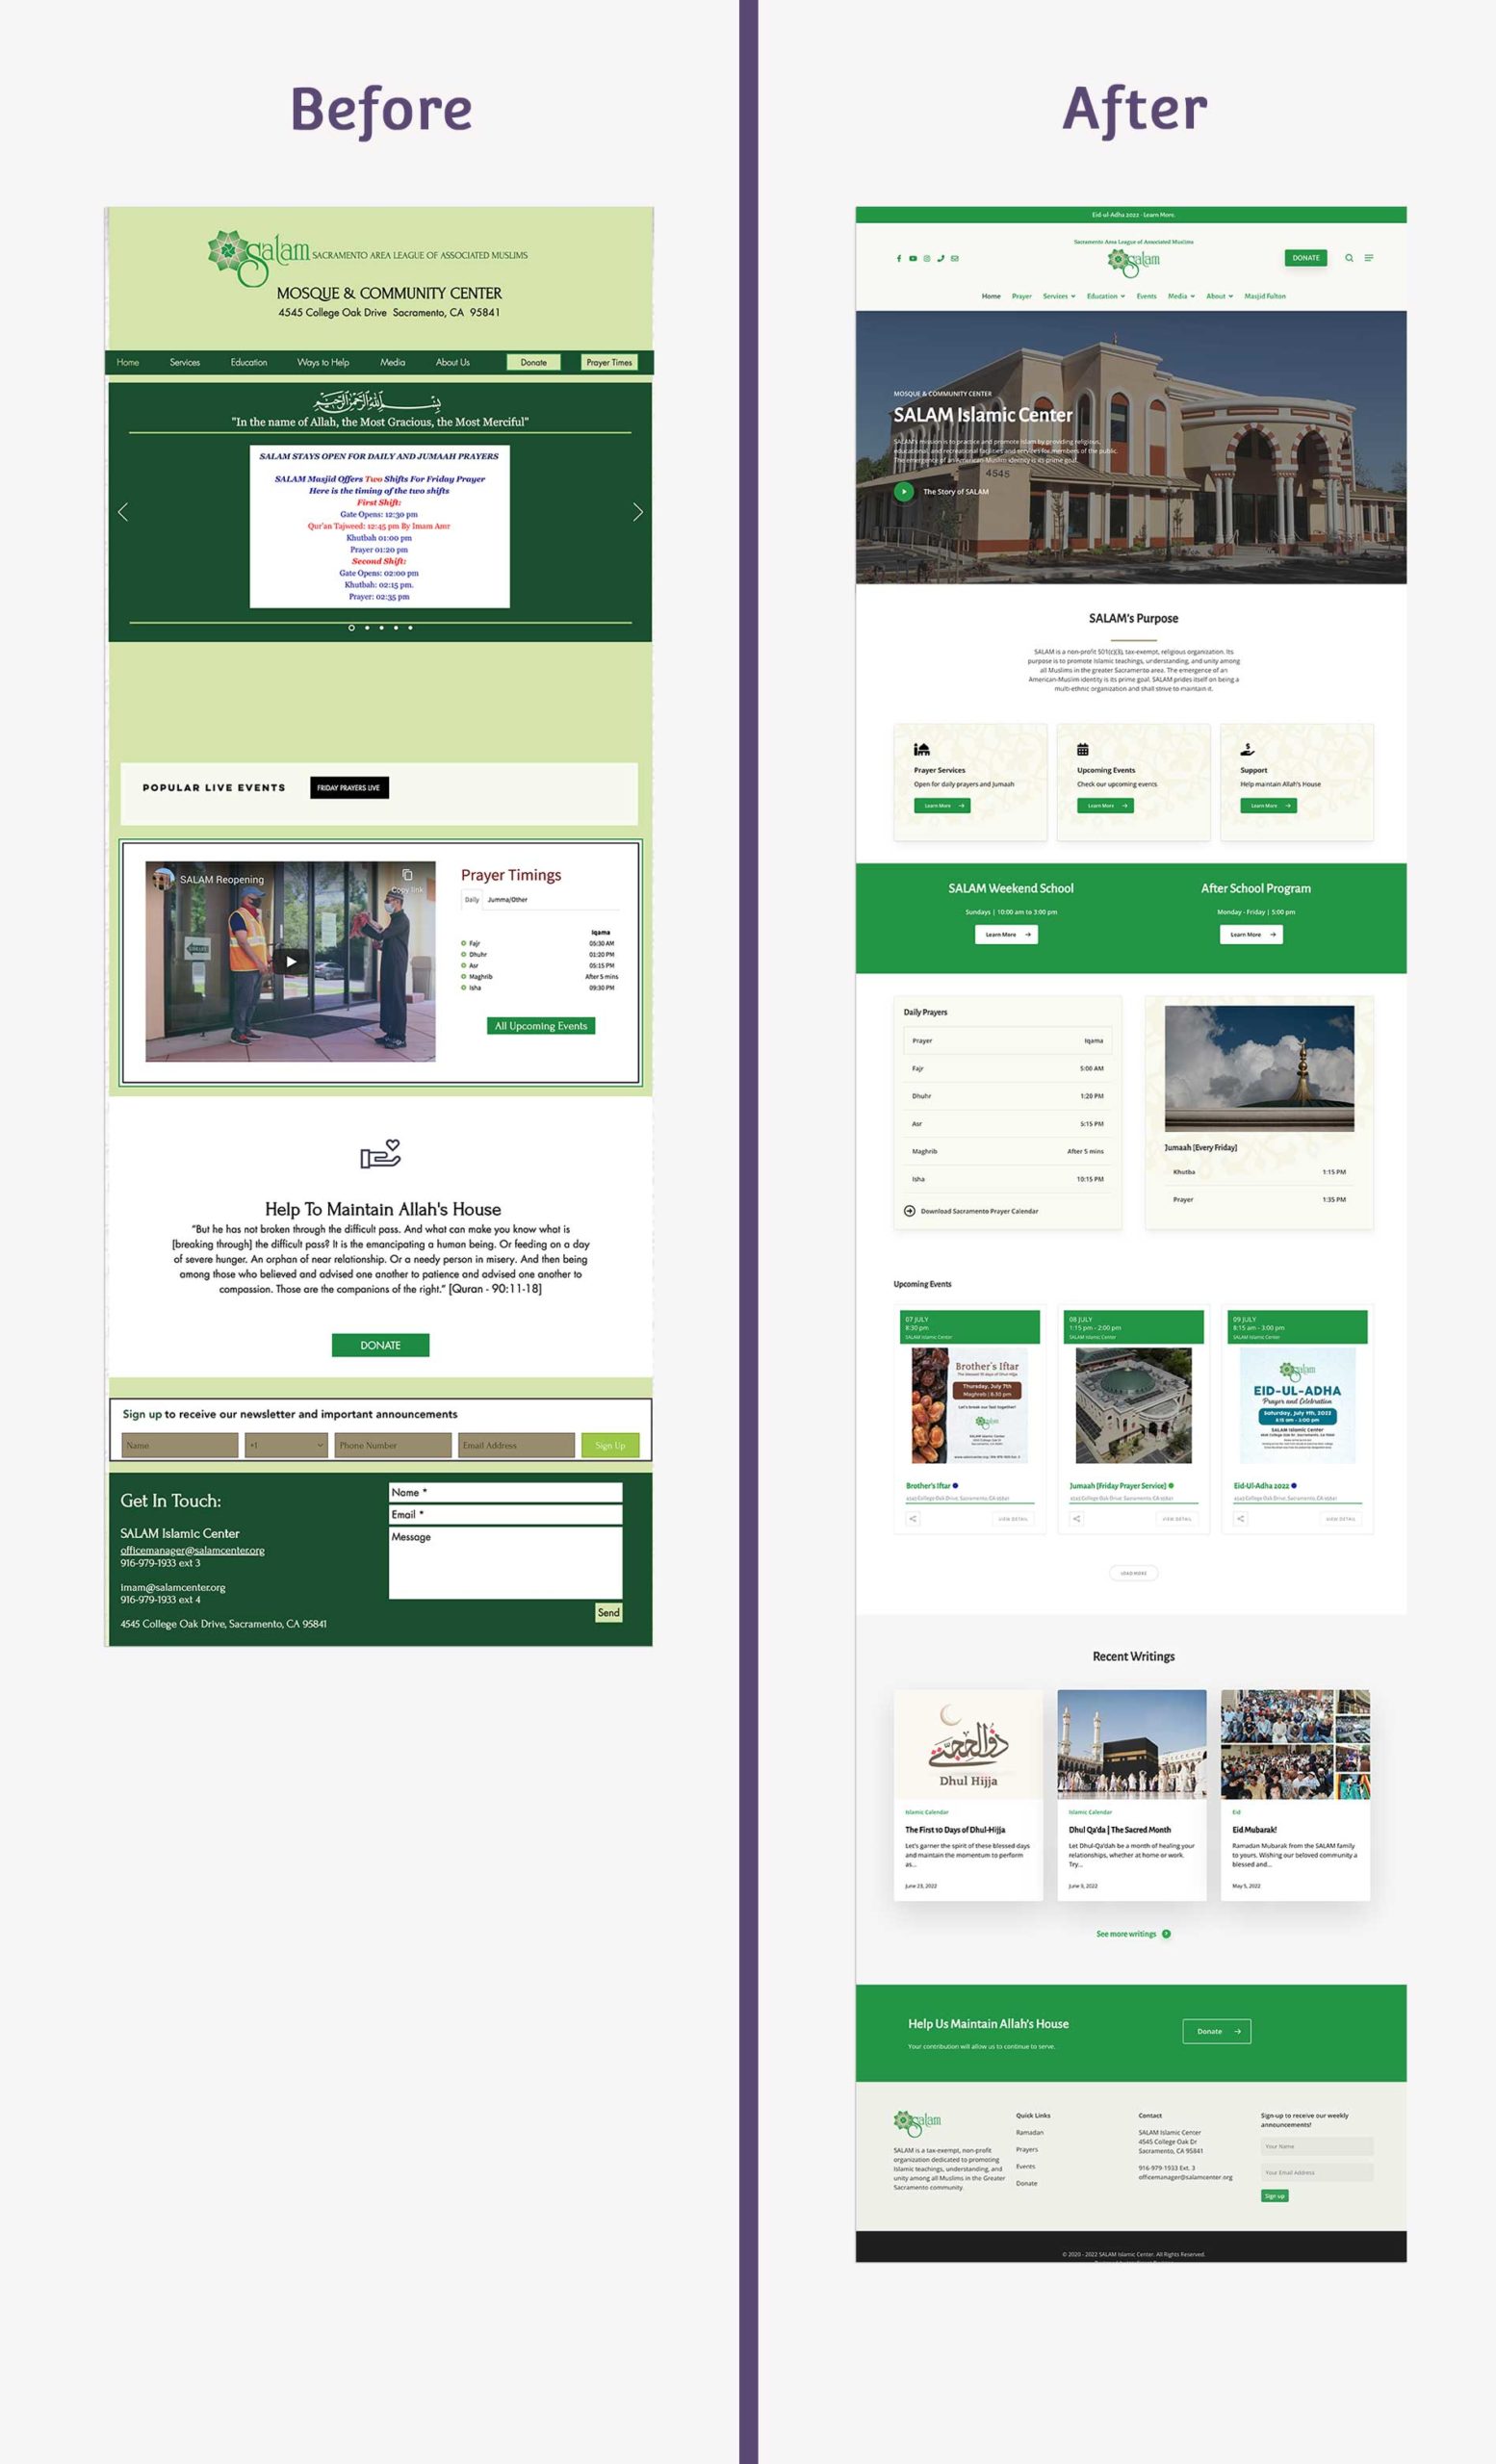 SALAM Islamic Center Website before and after